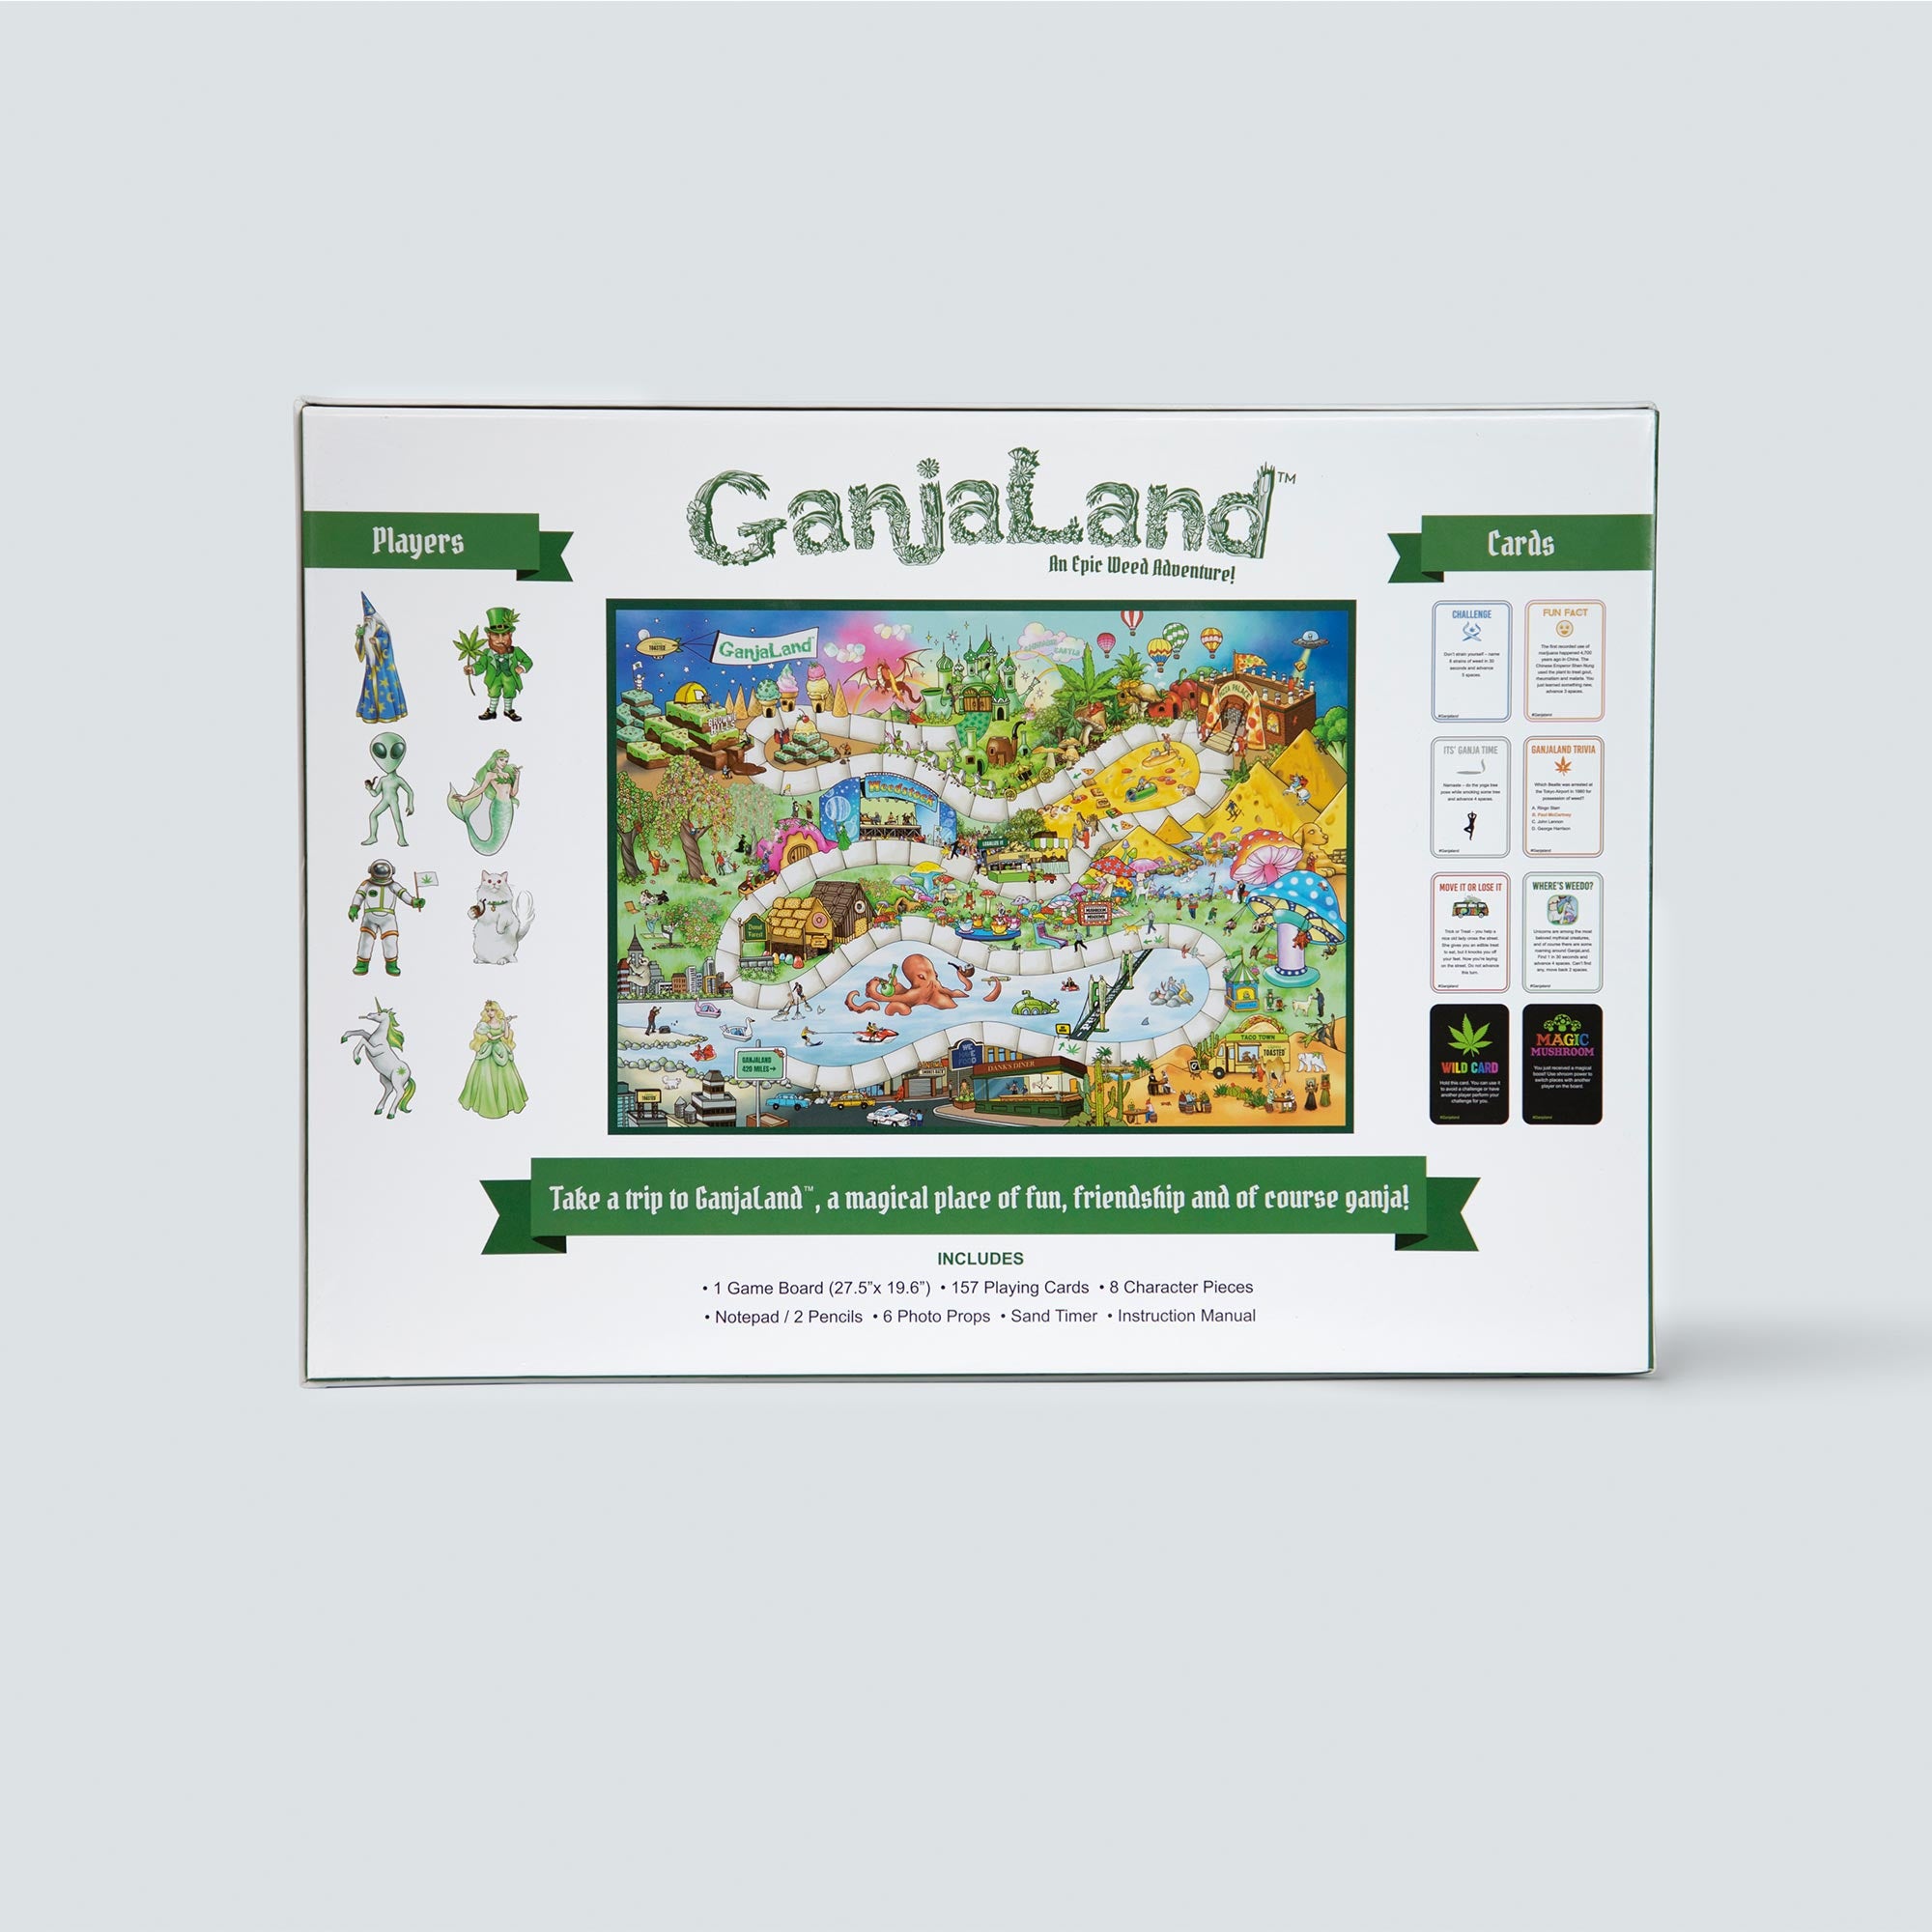 ganjaland-game-box-and-game-play-02-what-do-you-meme-by-relatable